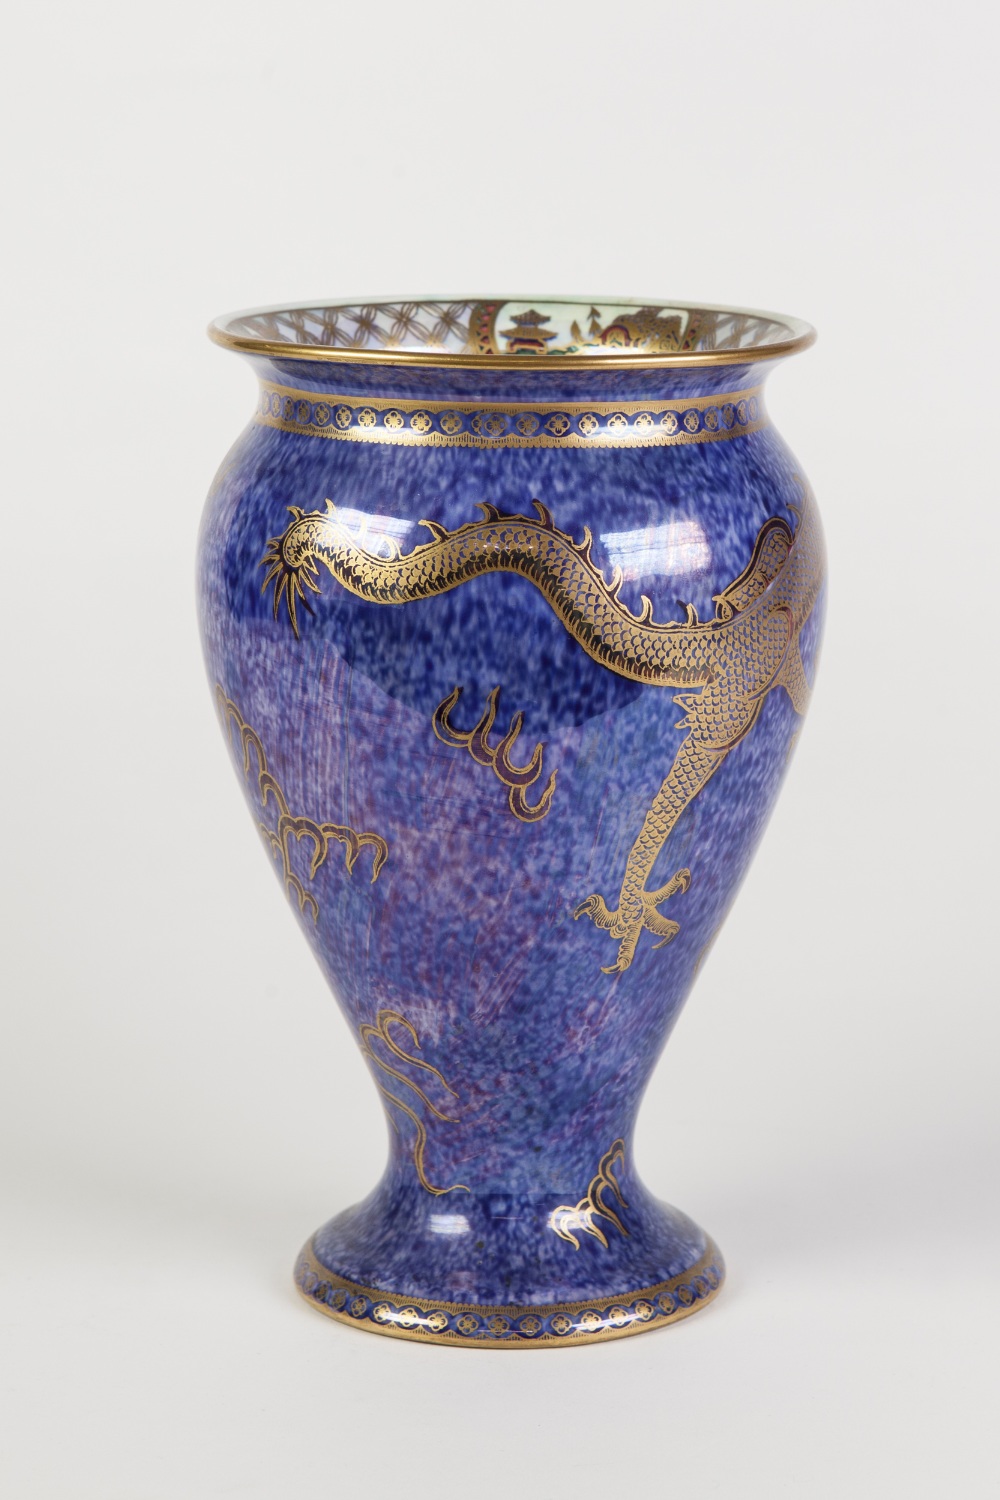 WEDGWOOD 'DRAGON' LUSTRE CHINA VASE, of footed ovoid form with lipped rim, the exterior gilt printed - Image 2 of 2